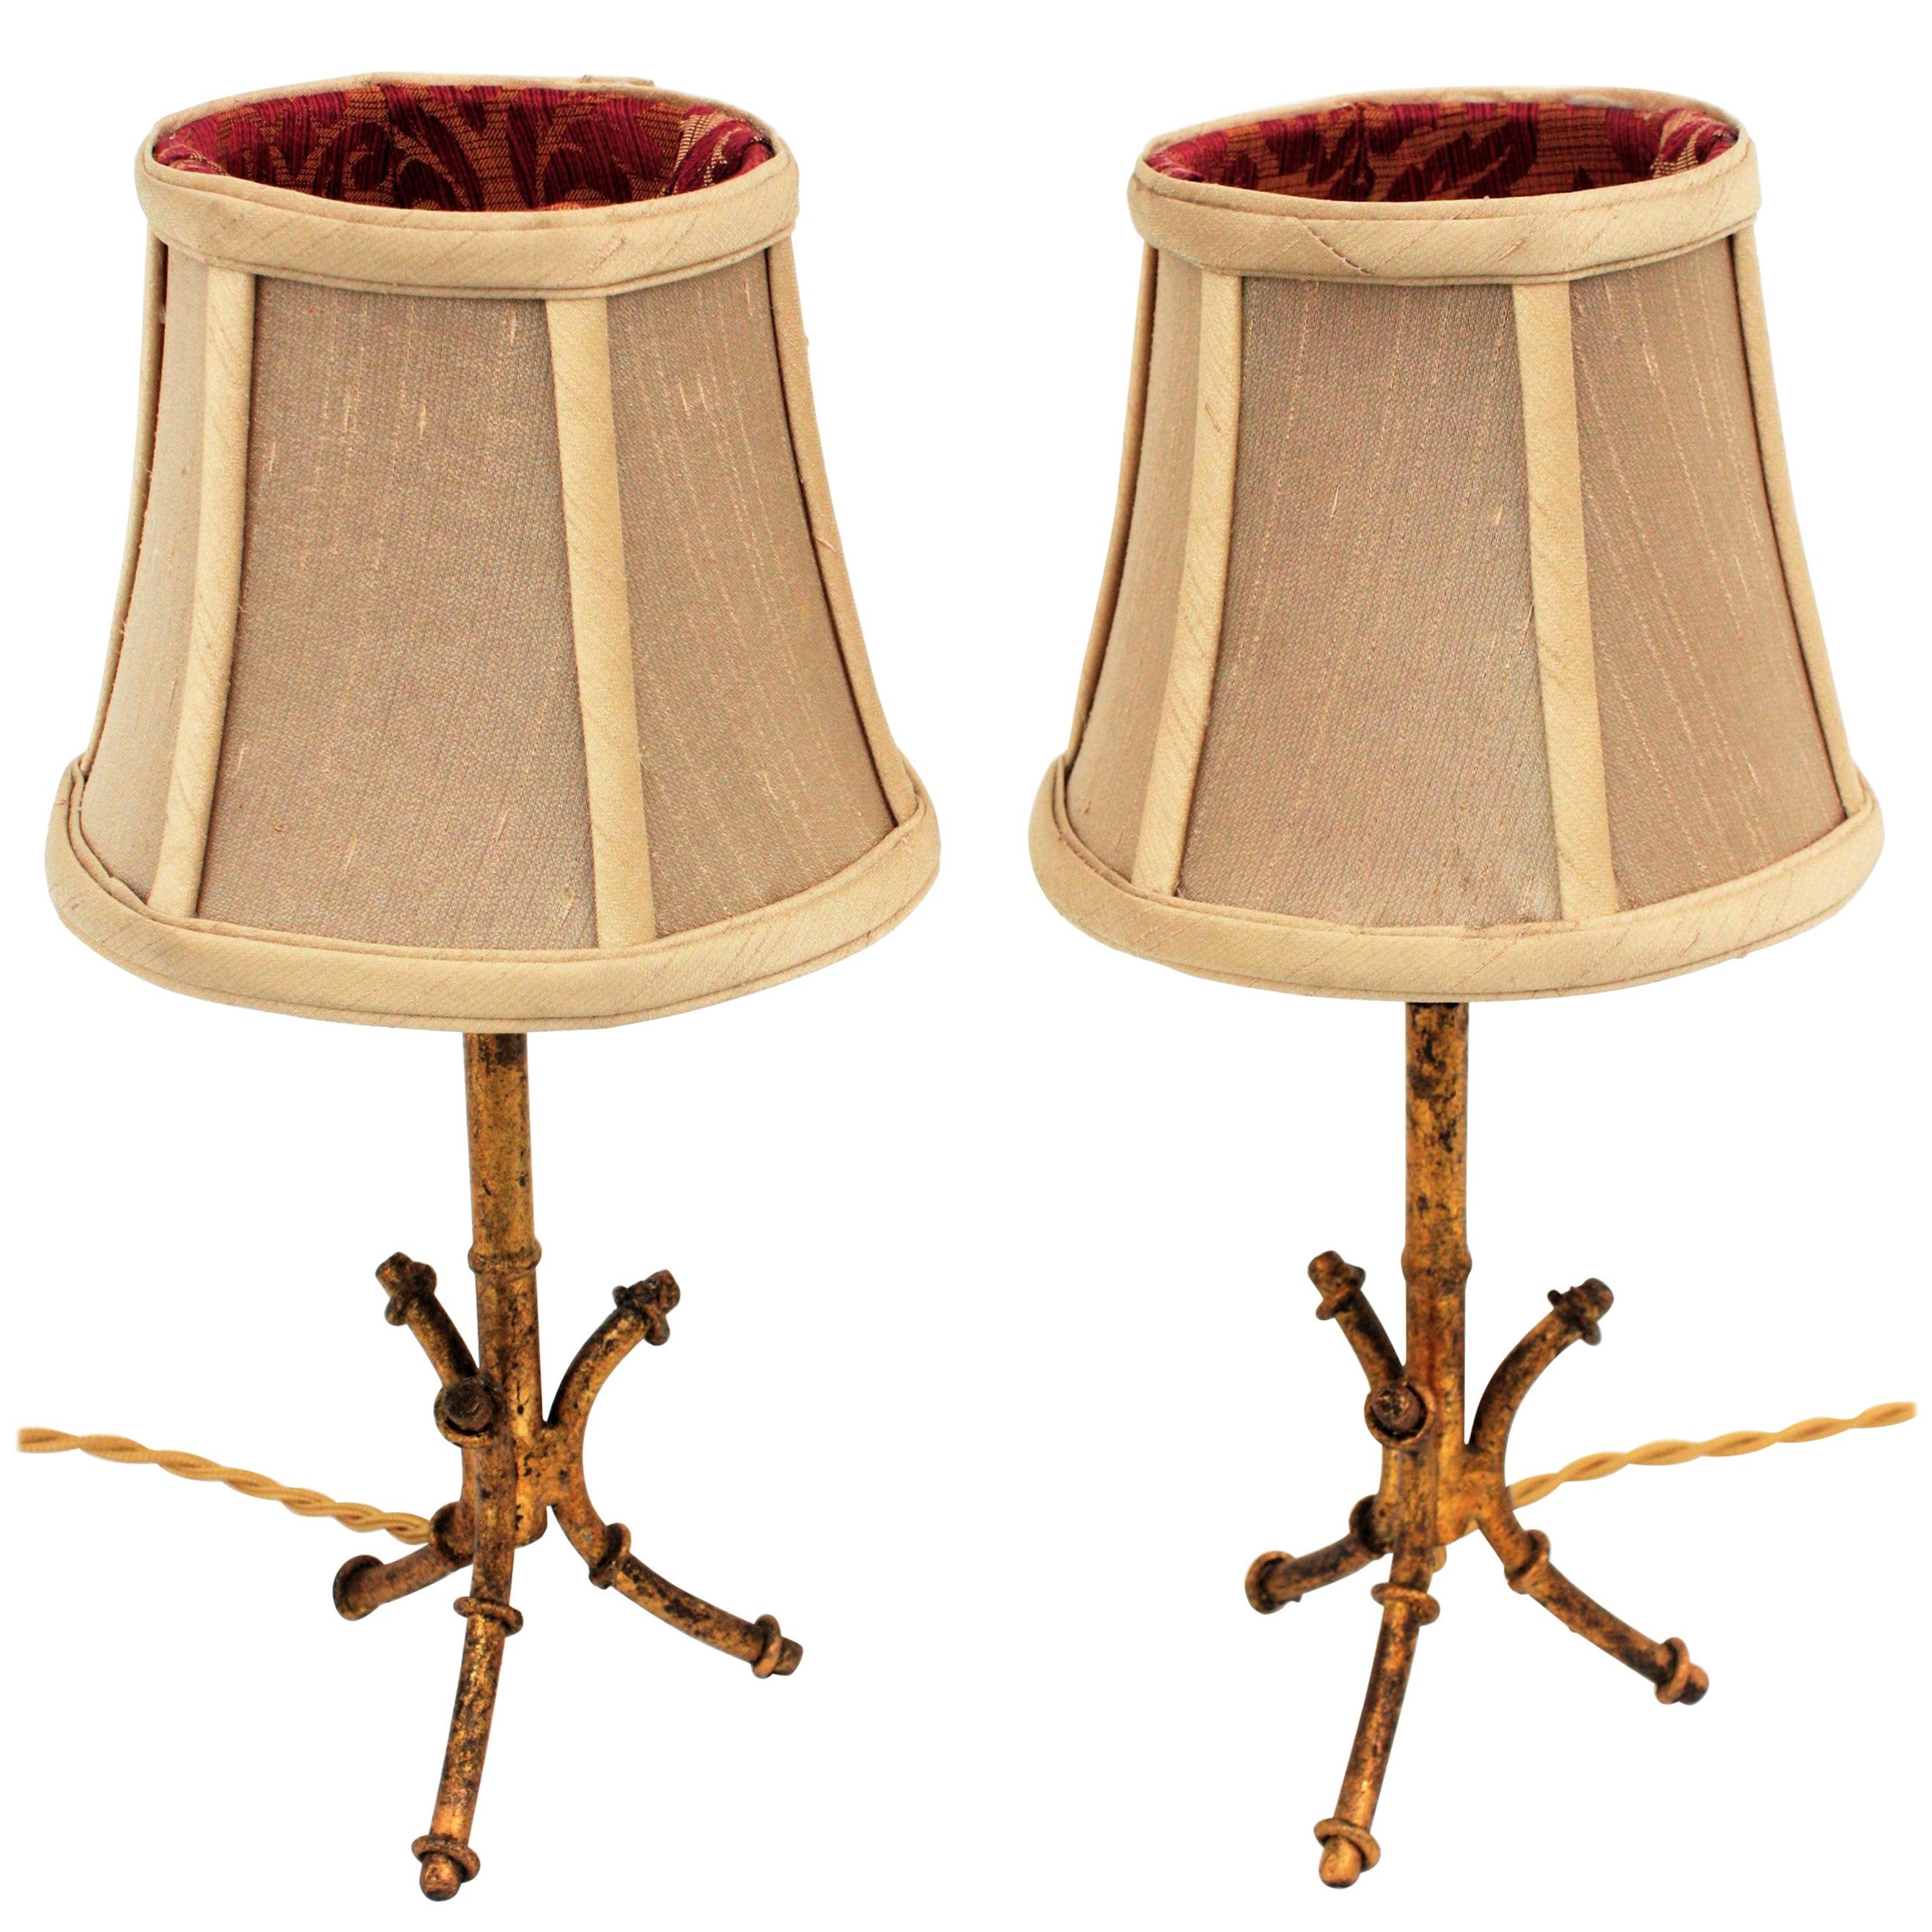 Elegant Hollywood Regency bamboo inspired gilt iron tripod table lamps in the style of Maison Baguès. France, 1950s
These lamps have new upholstered shades: a raw silk fabric in sand color at the external part and a burgundy and gold jacquard